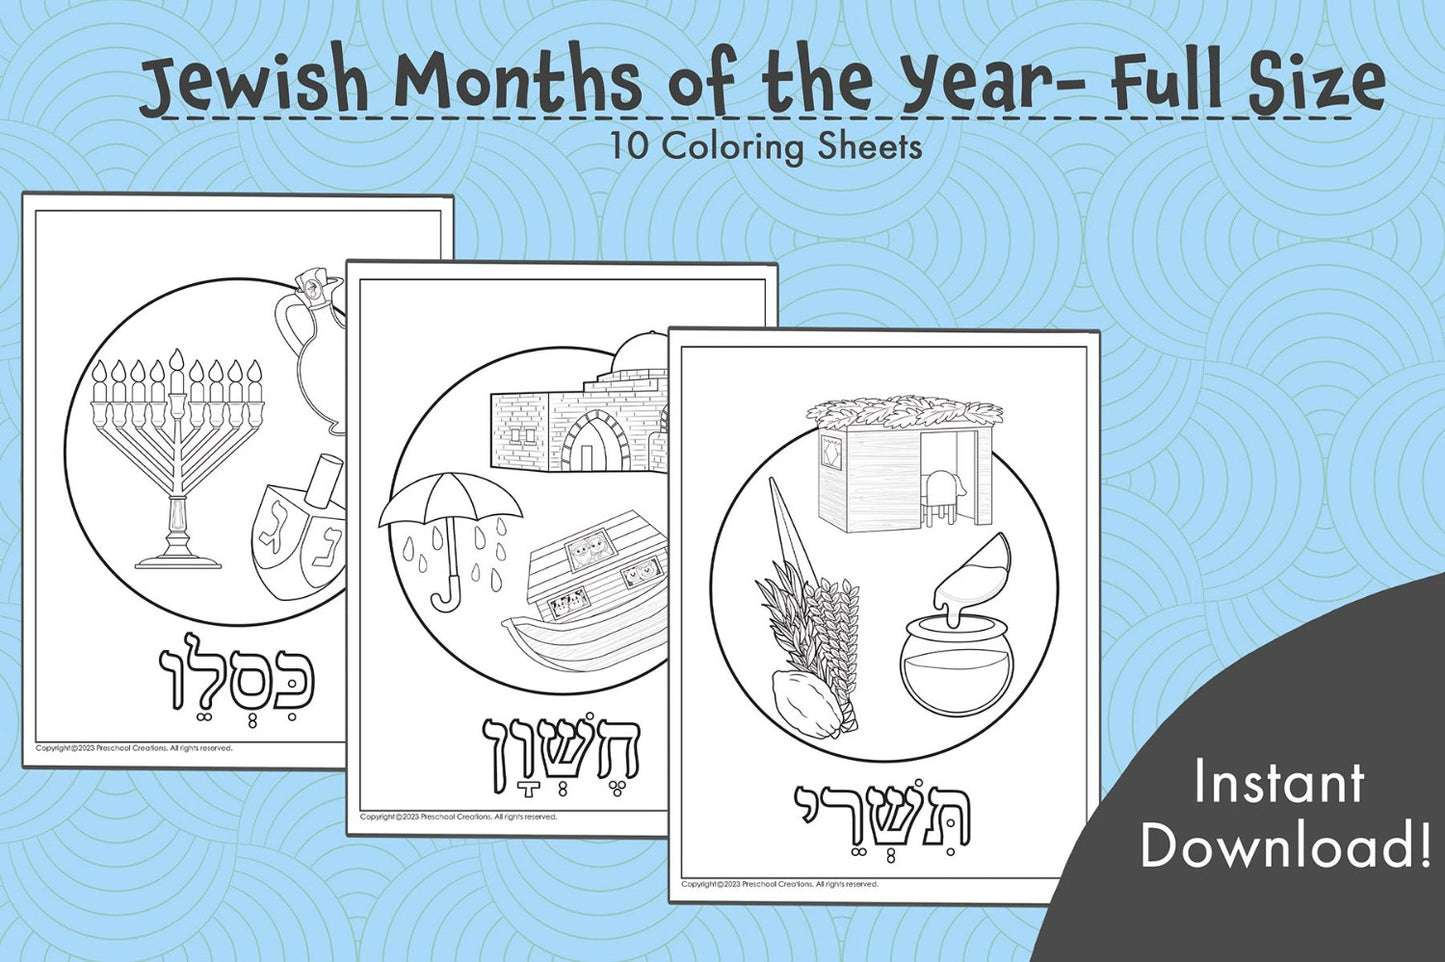 12 full size black and white coloring pages showcasing highlights from each month of the Jewish calendar year.  Introduce children to the Jewish calendar with these Jewish months coloring sheets. Featuring engaging images for each month's Jewish holidays, these coloring pages will keep the children engaged at home or in school. 